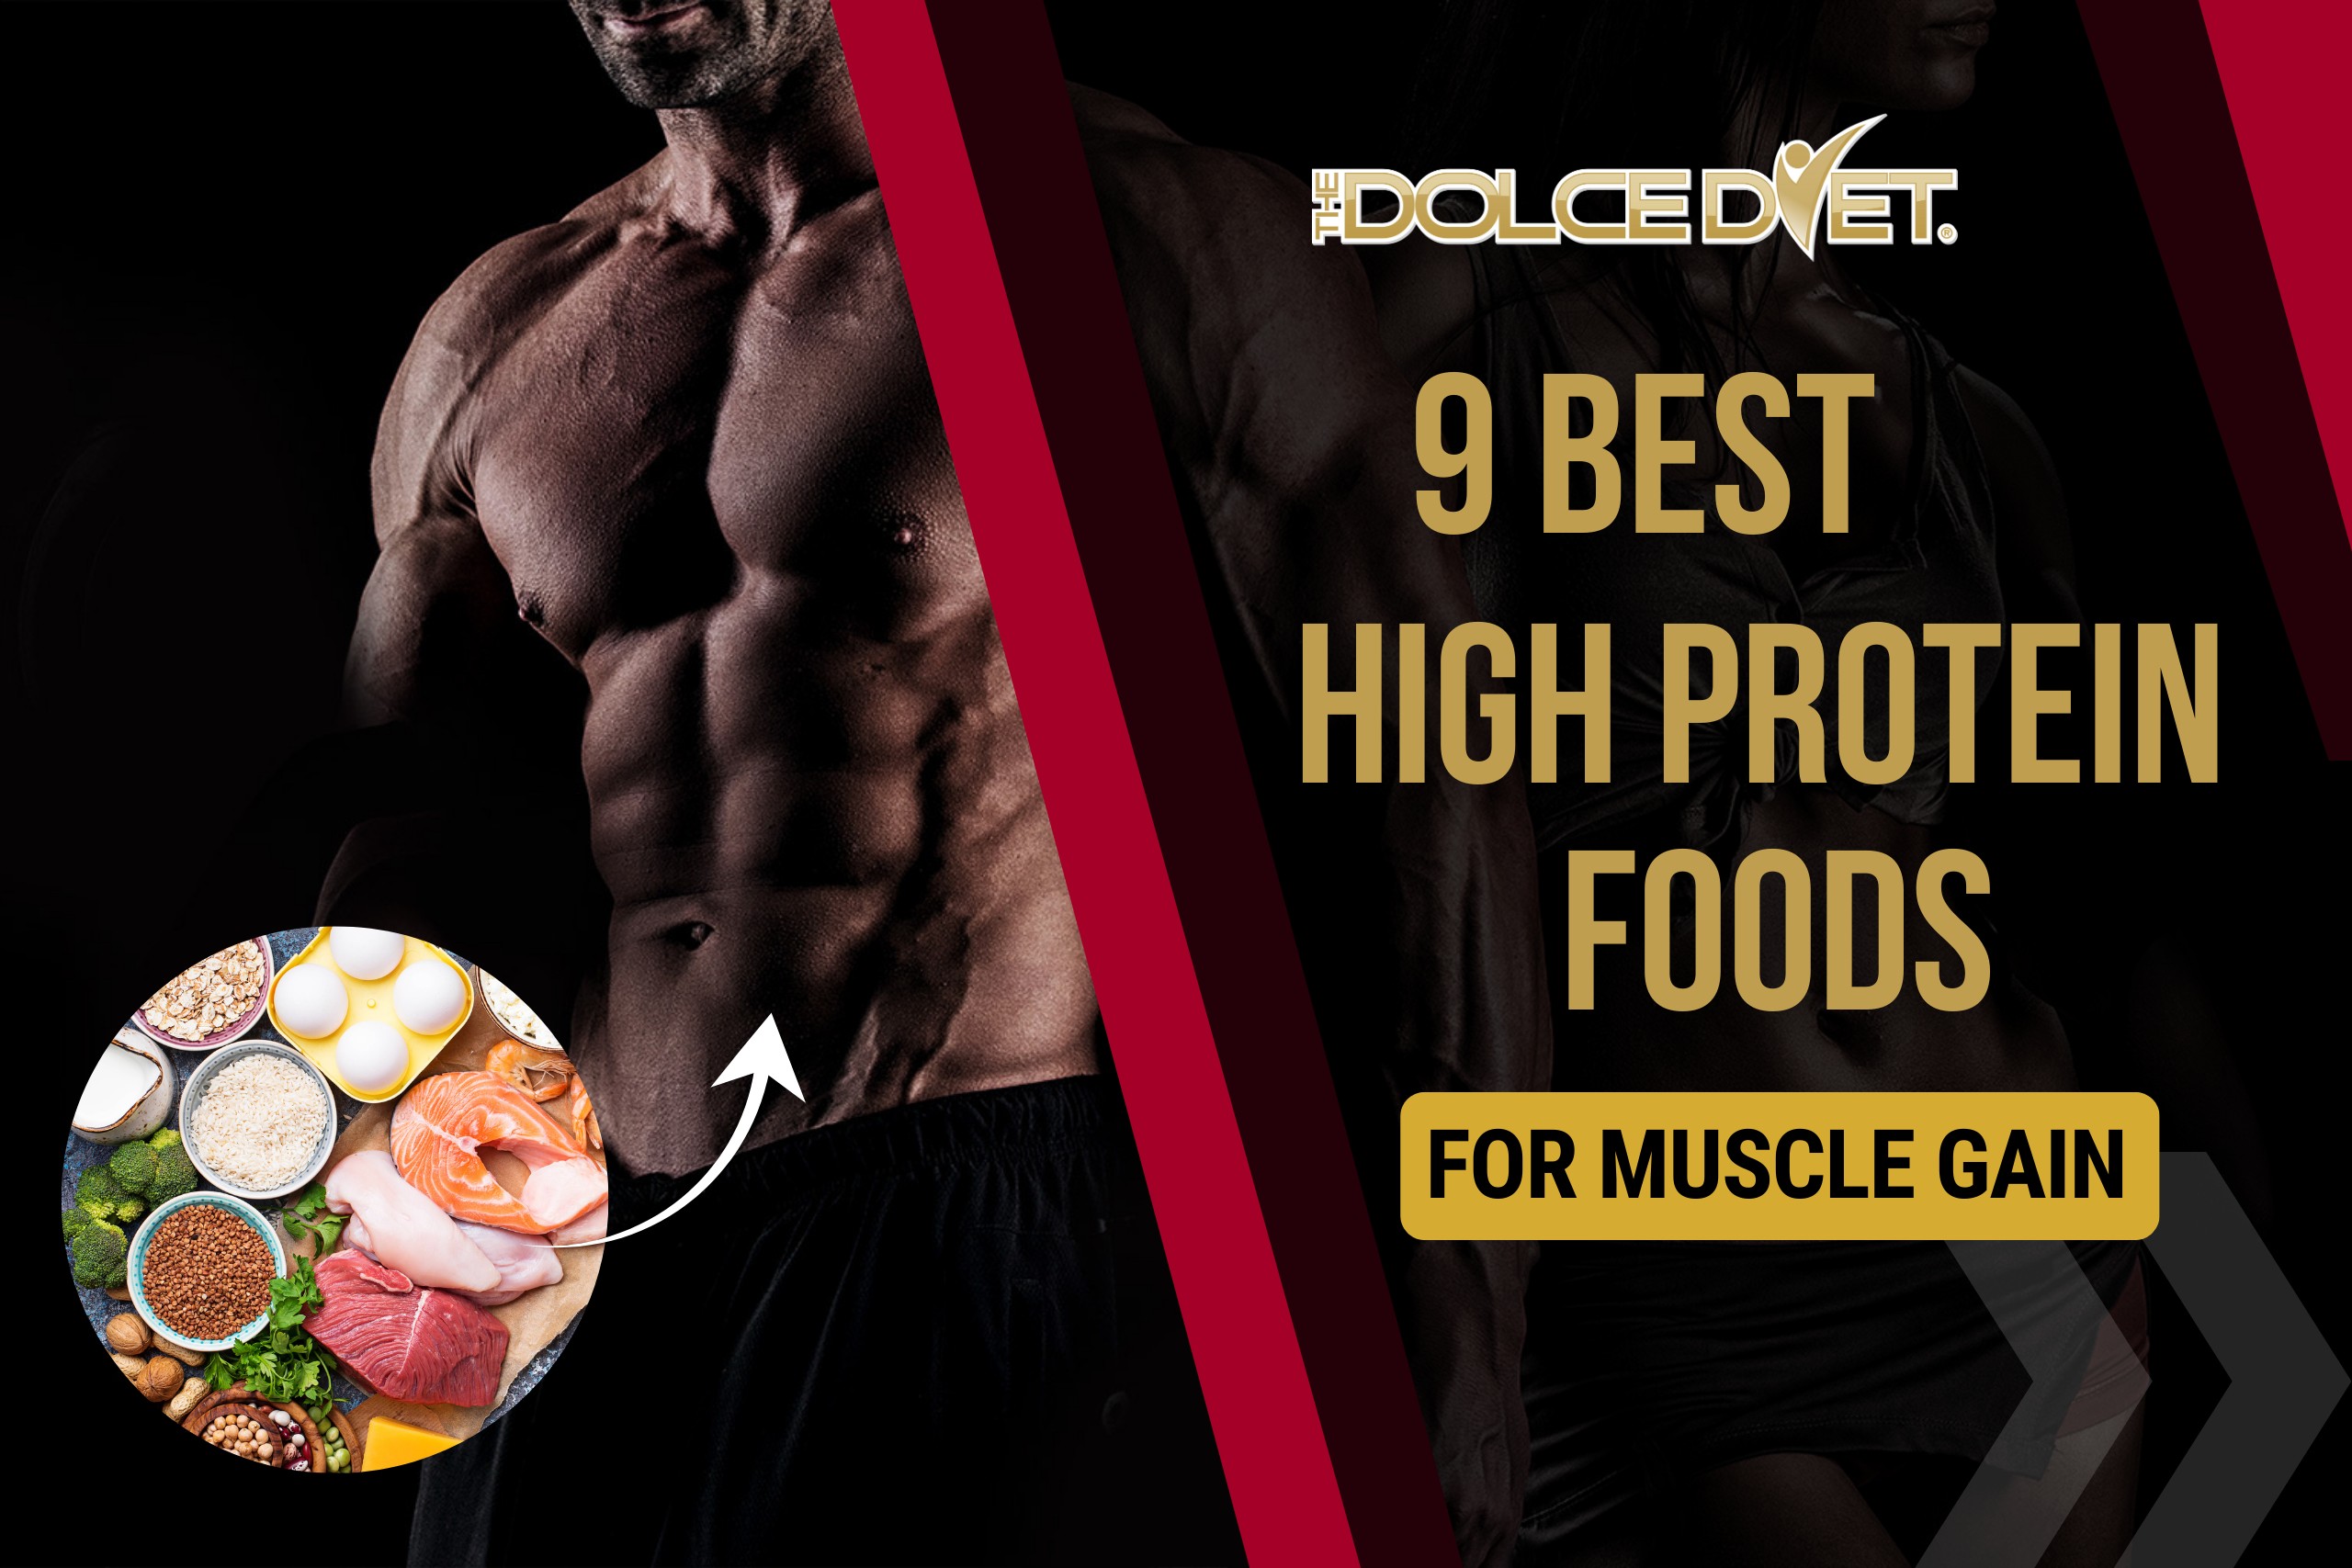 9 BEST HIGH PROTEIN FOODS FOR MUSCLE GAIN